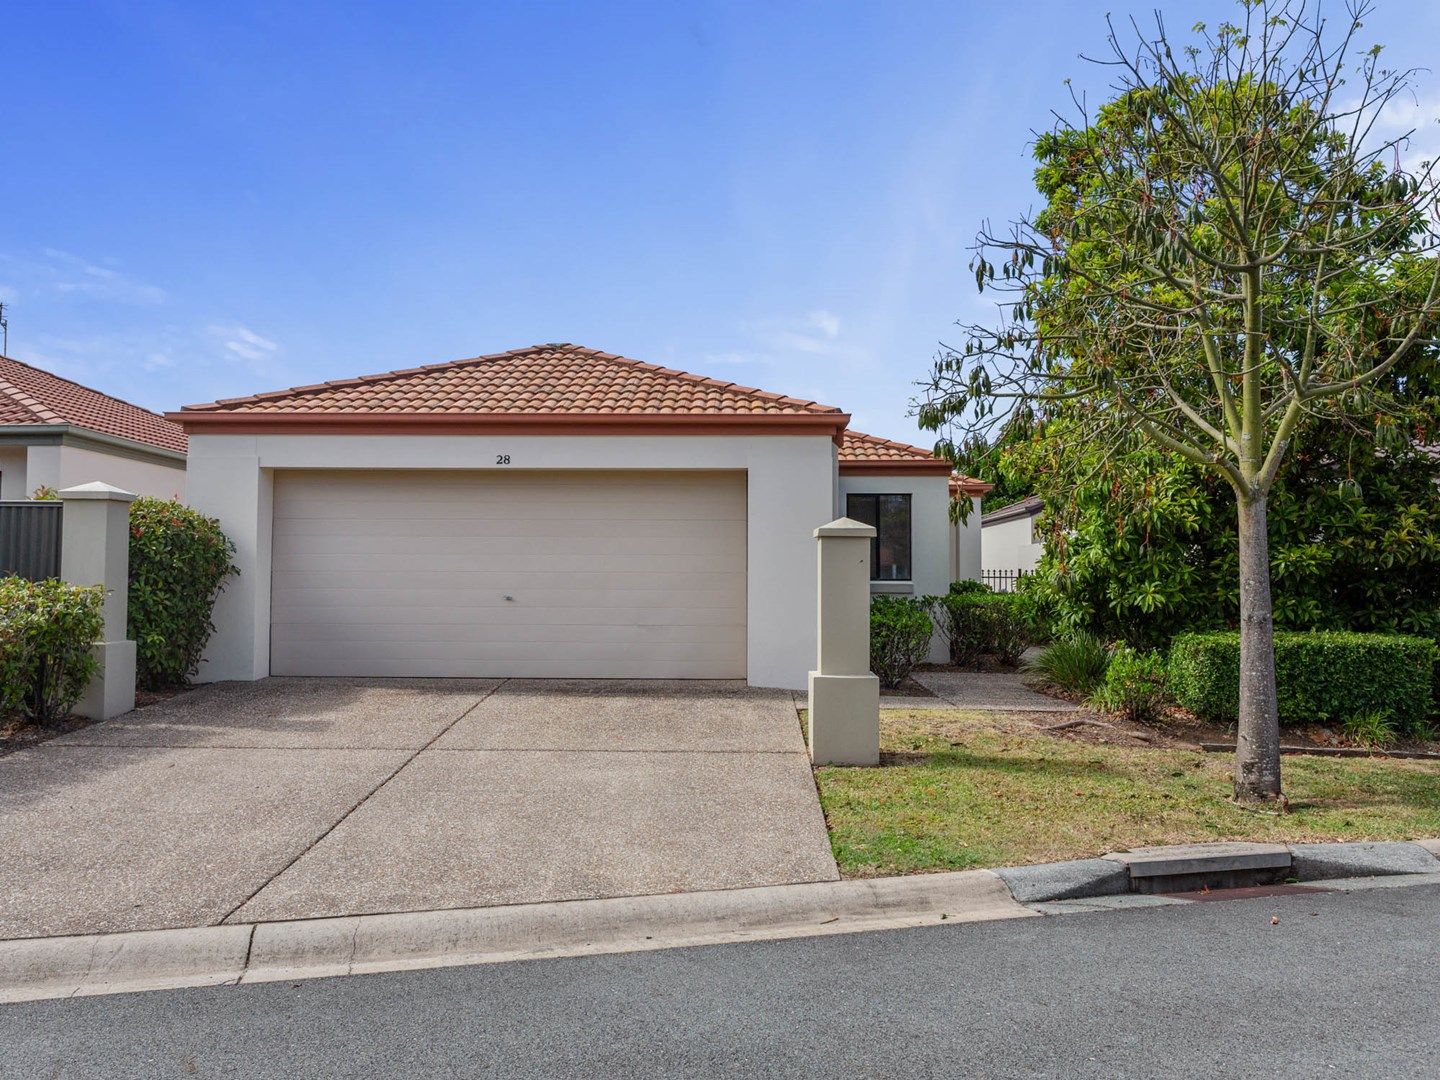 28A/64 'River Springs Country Club', Gilston Road, Nerang QLD 4211, Image 0